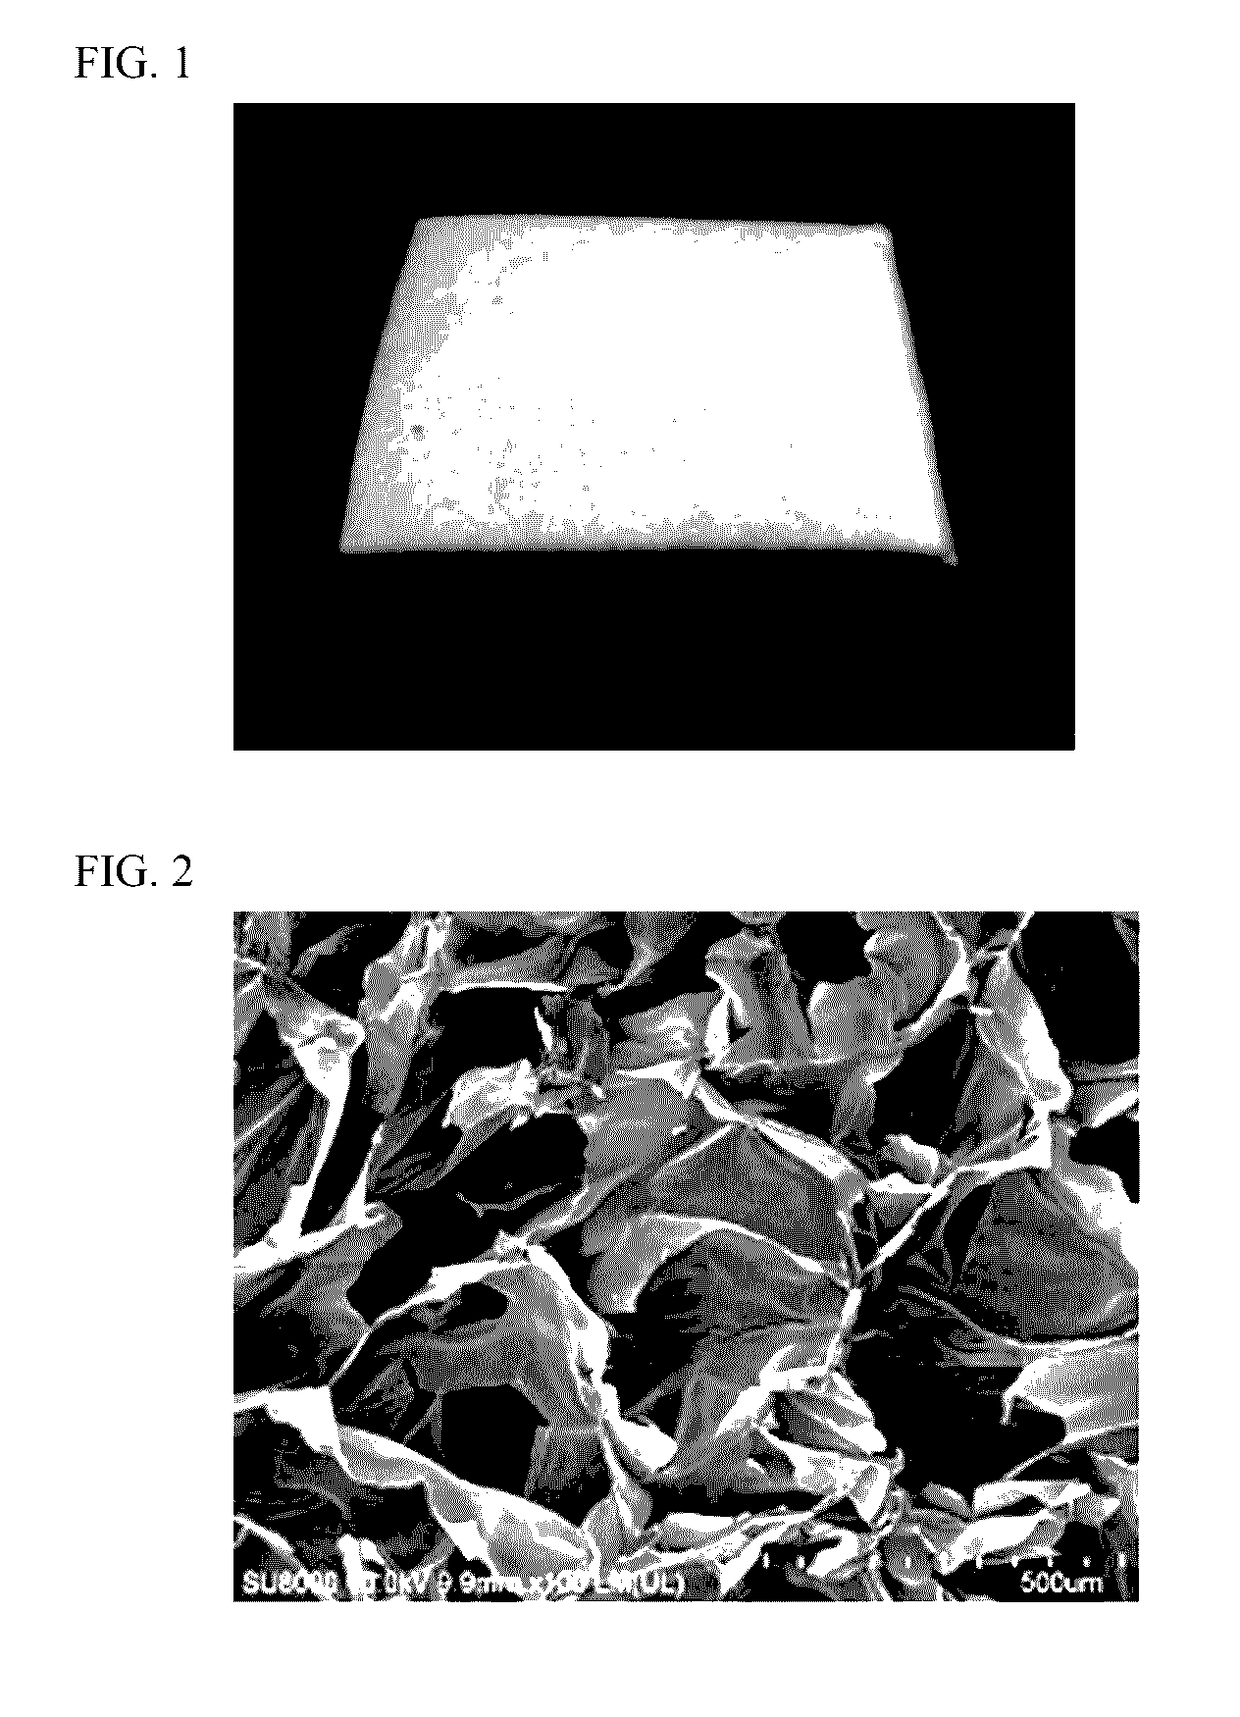 Carboxylmethyl cellulose foam for hemostasis and wound treatment, and method for preparing same